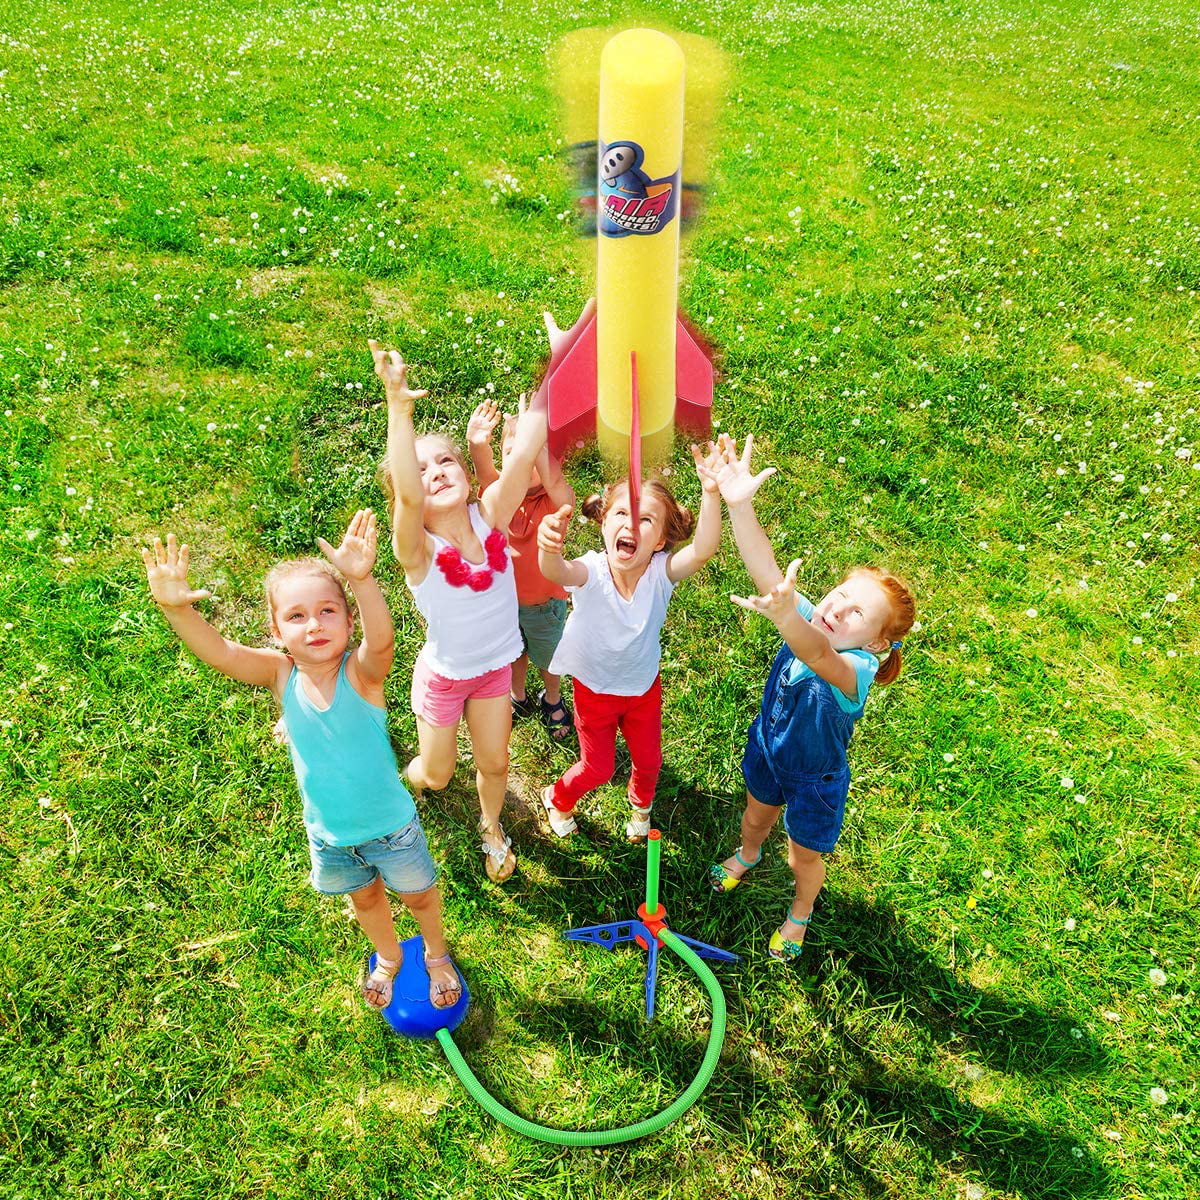 Jump Rocket Launchers Kids Toddler Outdoor Toys 6 Colorful Foam Games Activities 